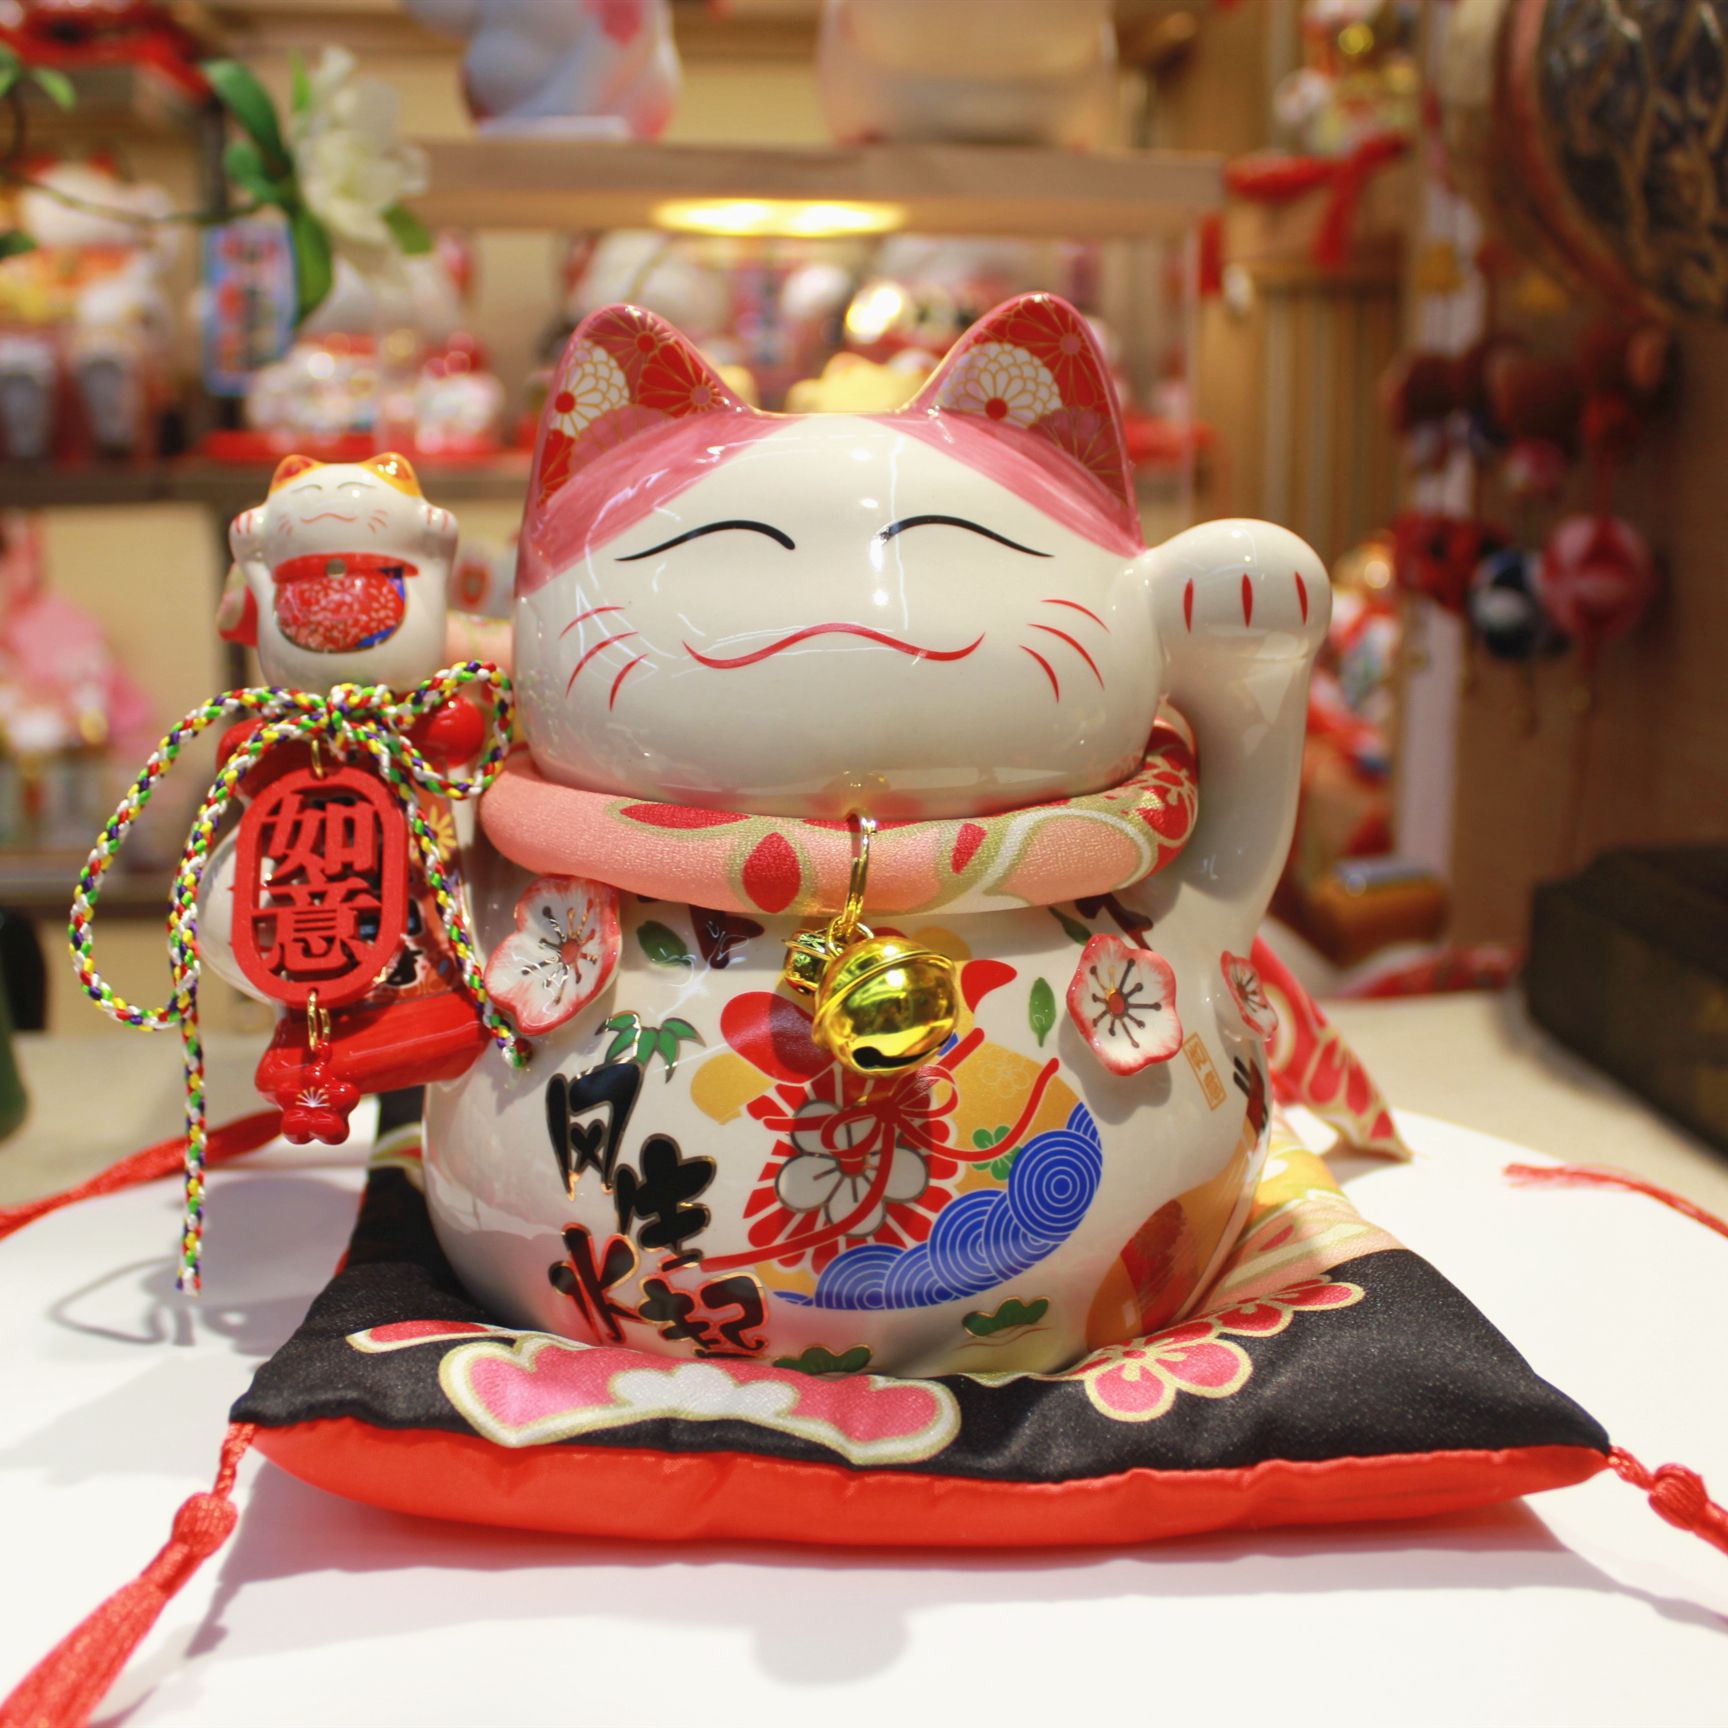 7 inch cherry blossom lucky cat piggy bank home store living room decoration ceramic lucky cat home decoration crafts